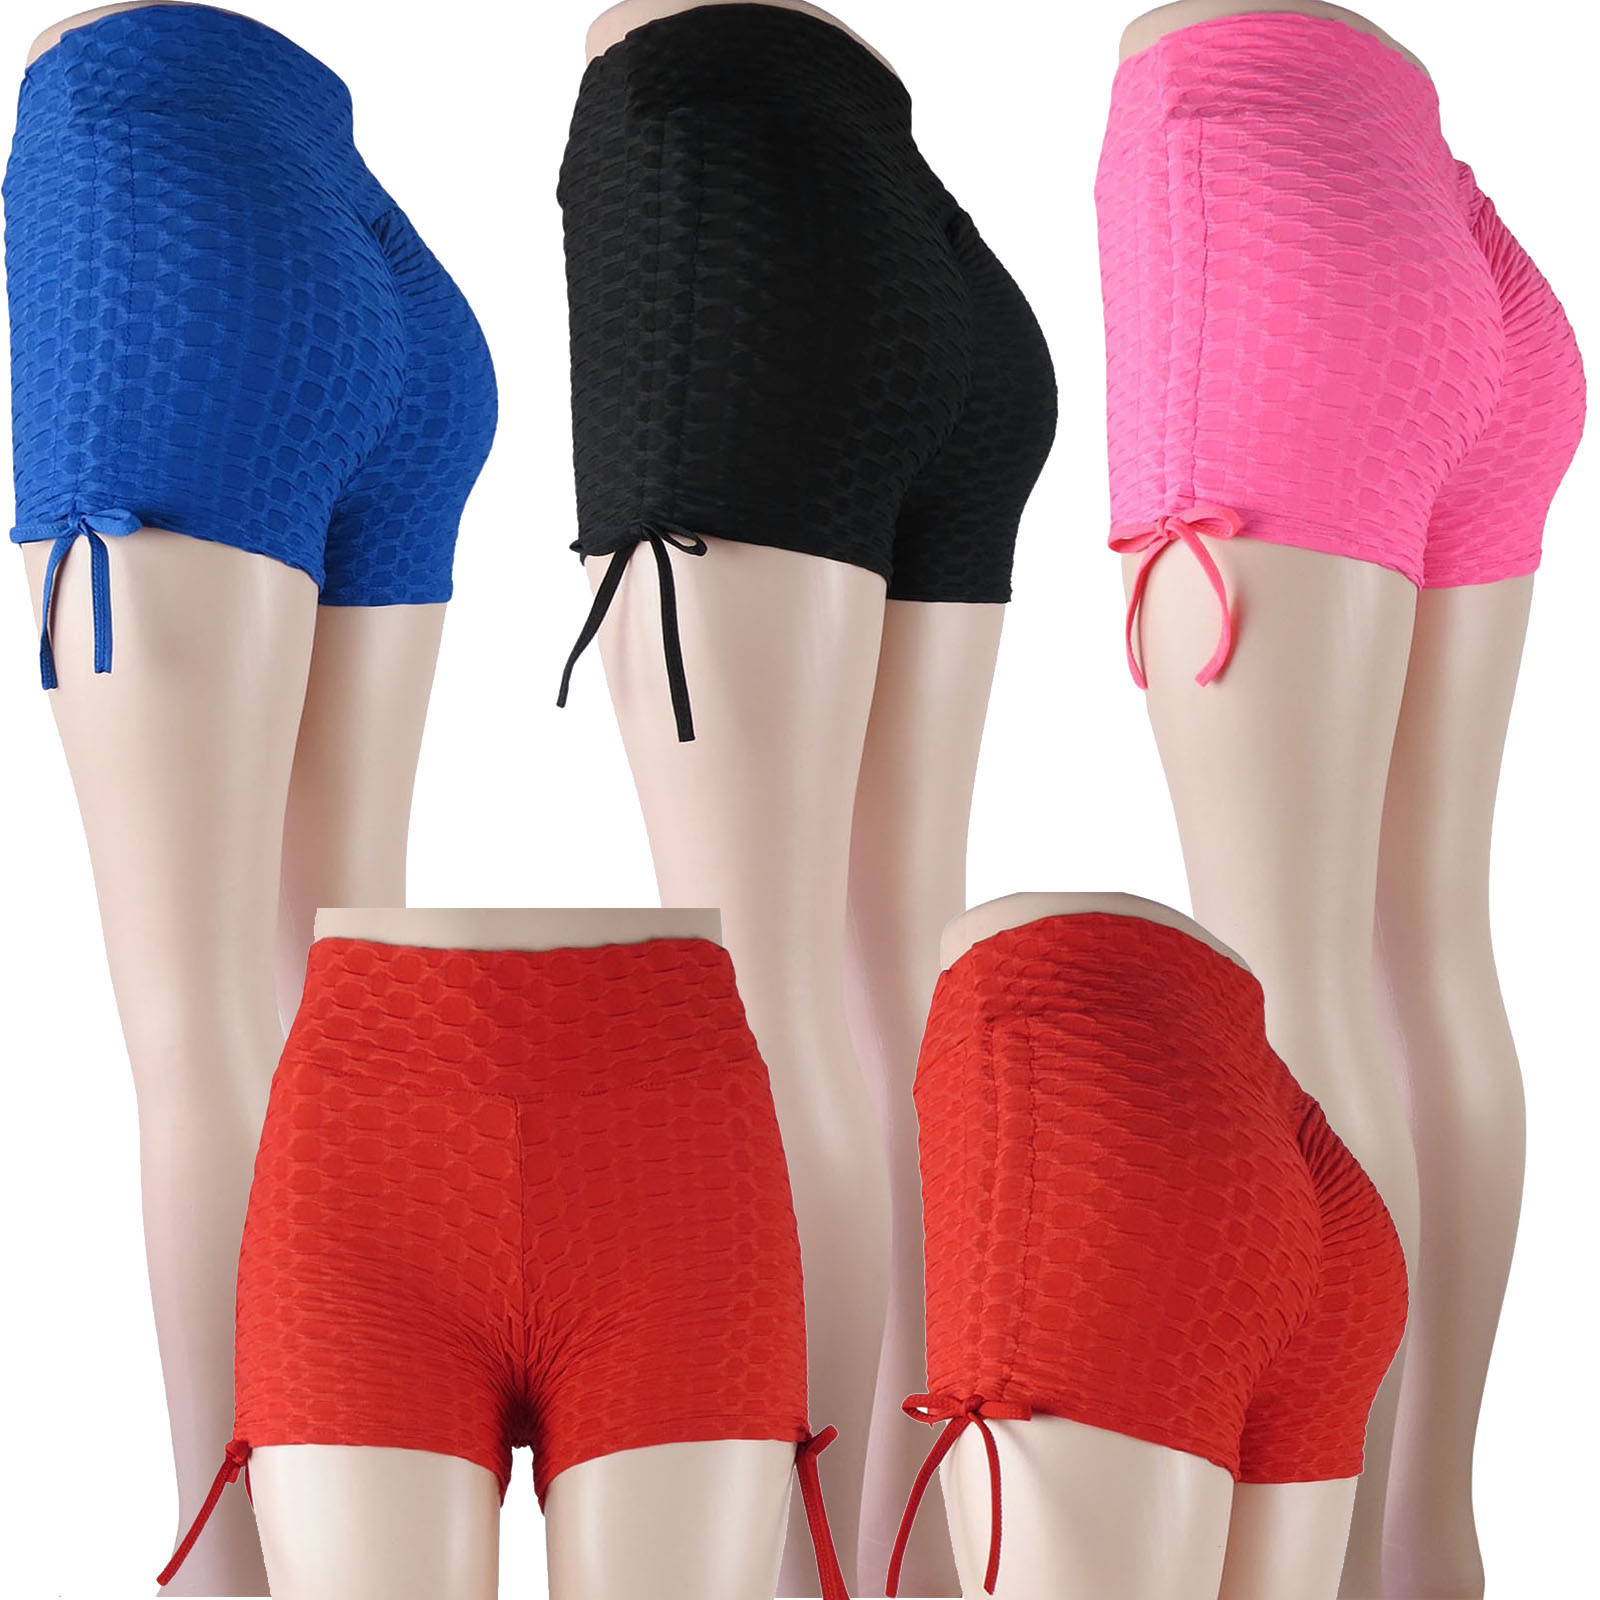 Women's Anti-Cellulite Honeycomb Textured Scrunch Butt Booty SHORTS - Assorted Colors